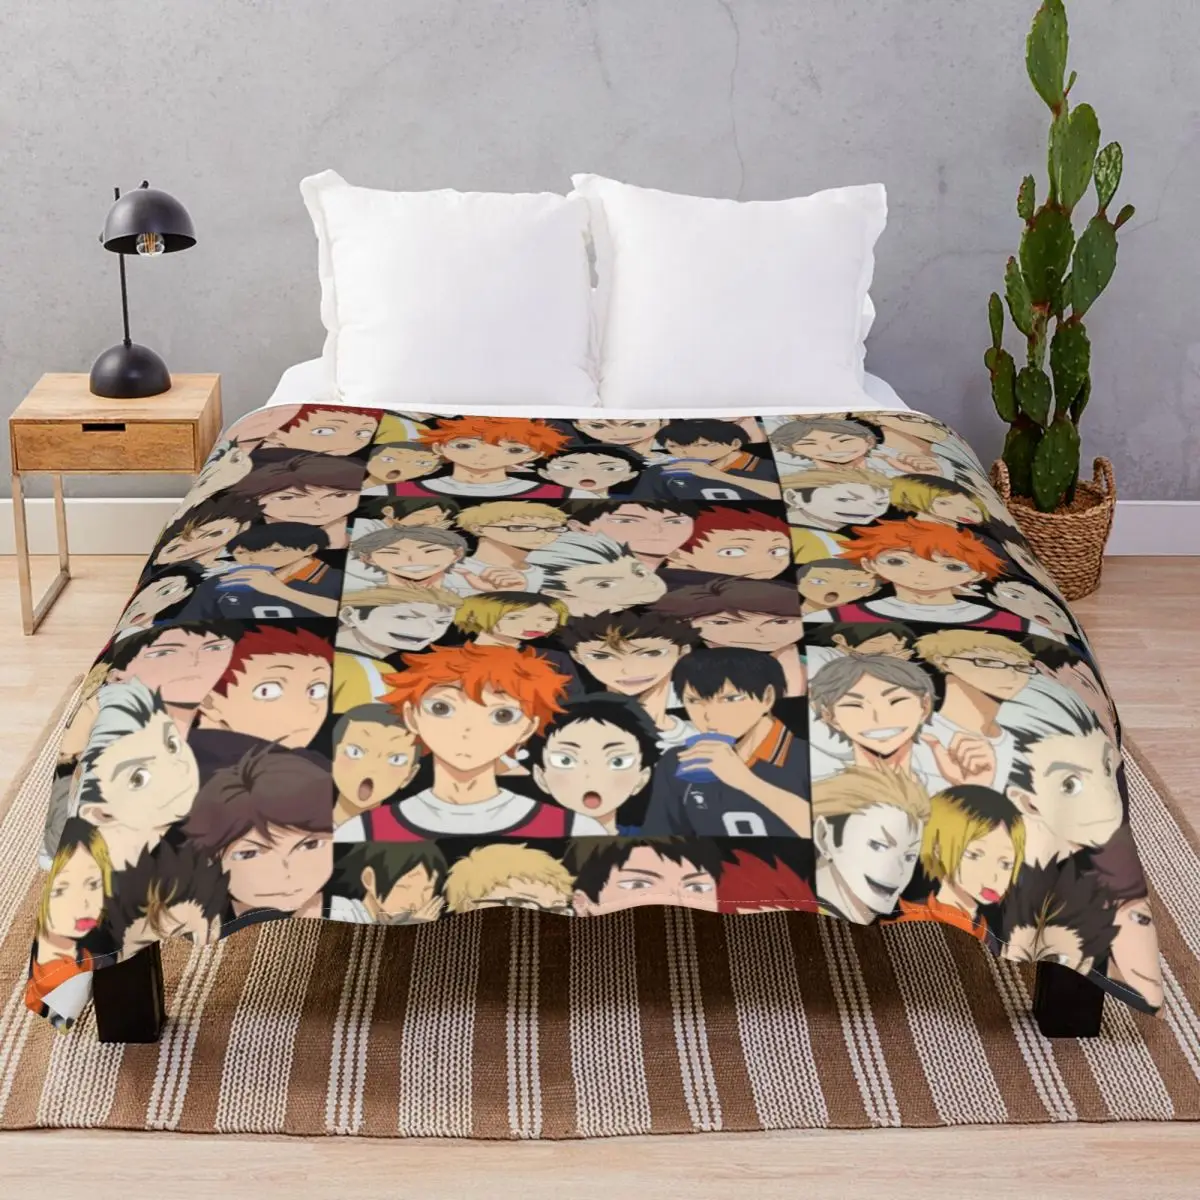 Haikyuu Blanket Fleece Spring Autumn Multifunction Throw Blankets for Bedding Home Couch Camp Office